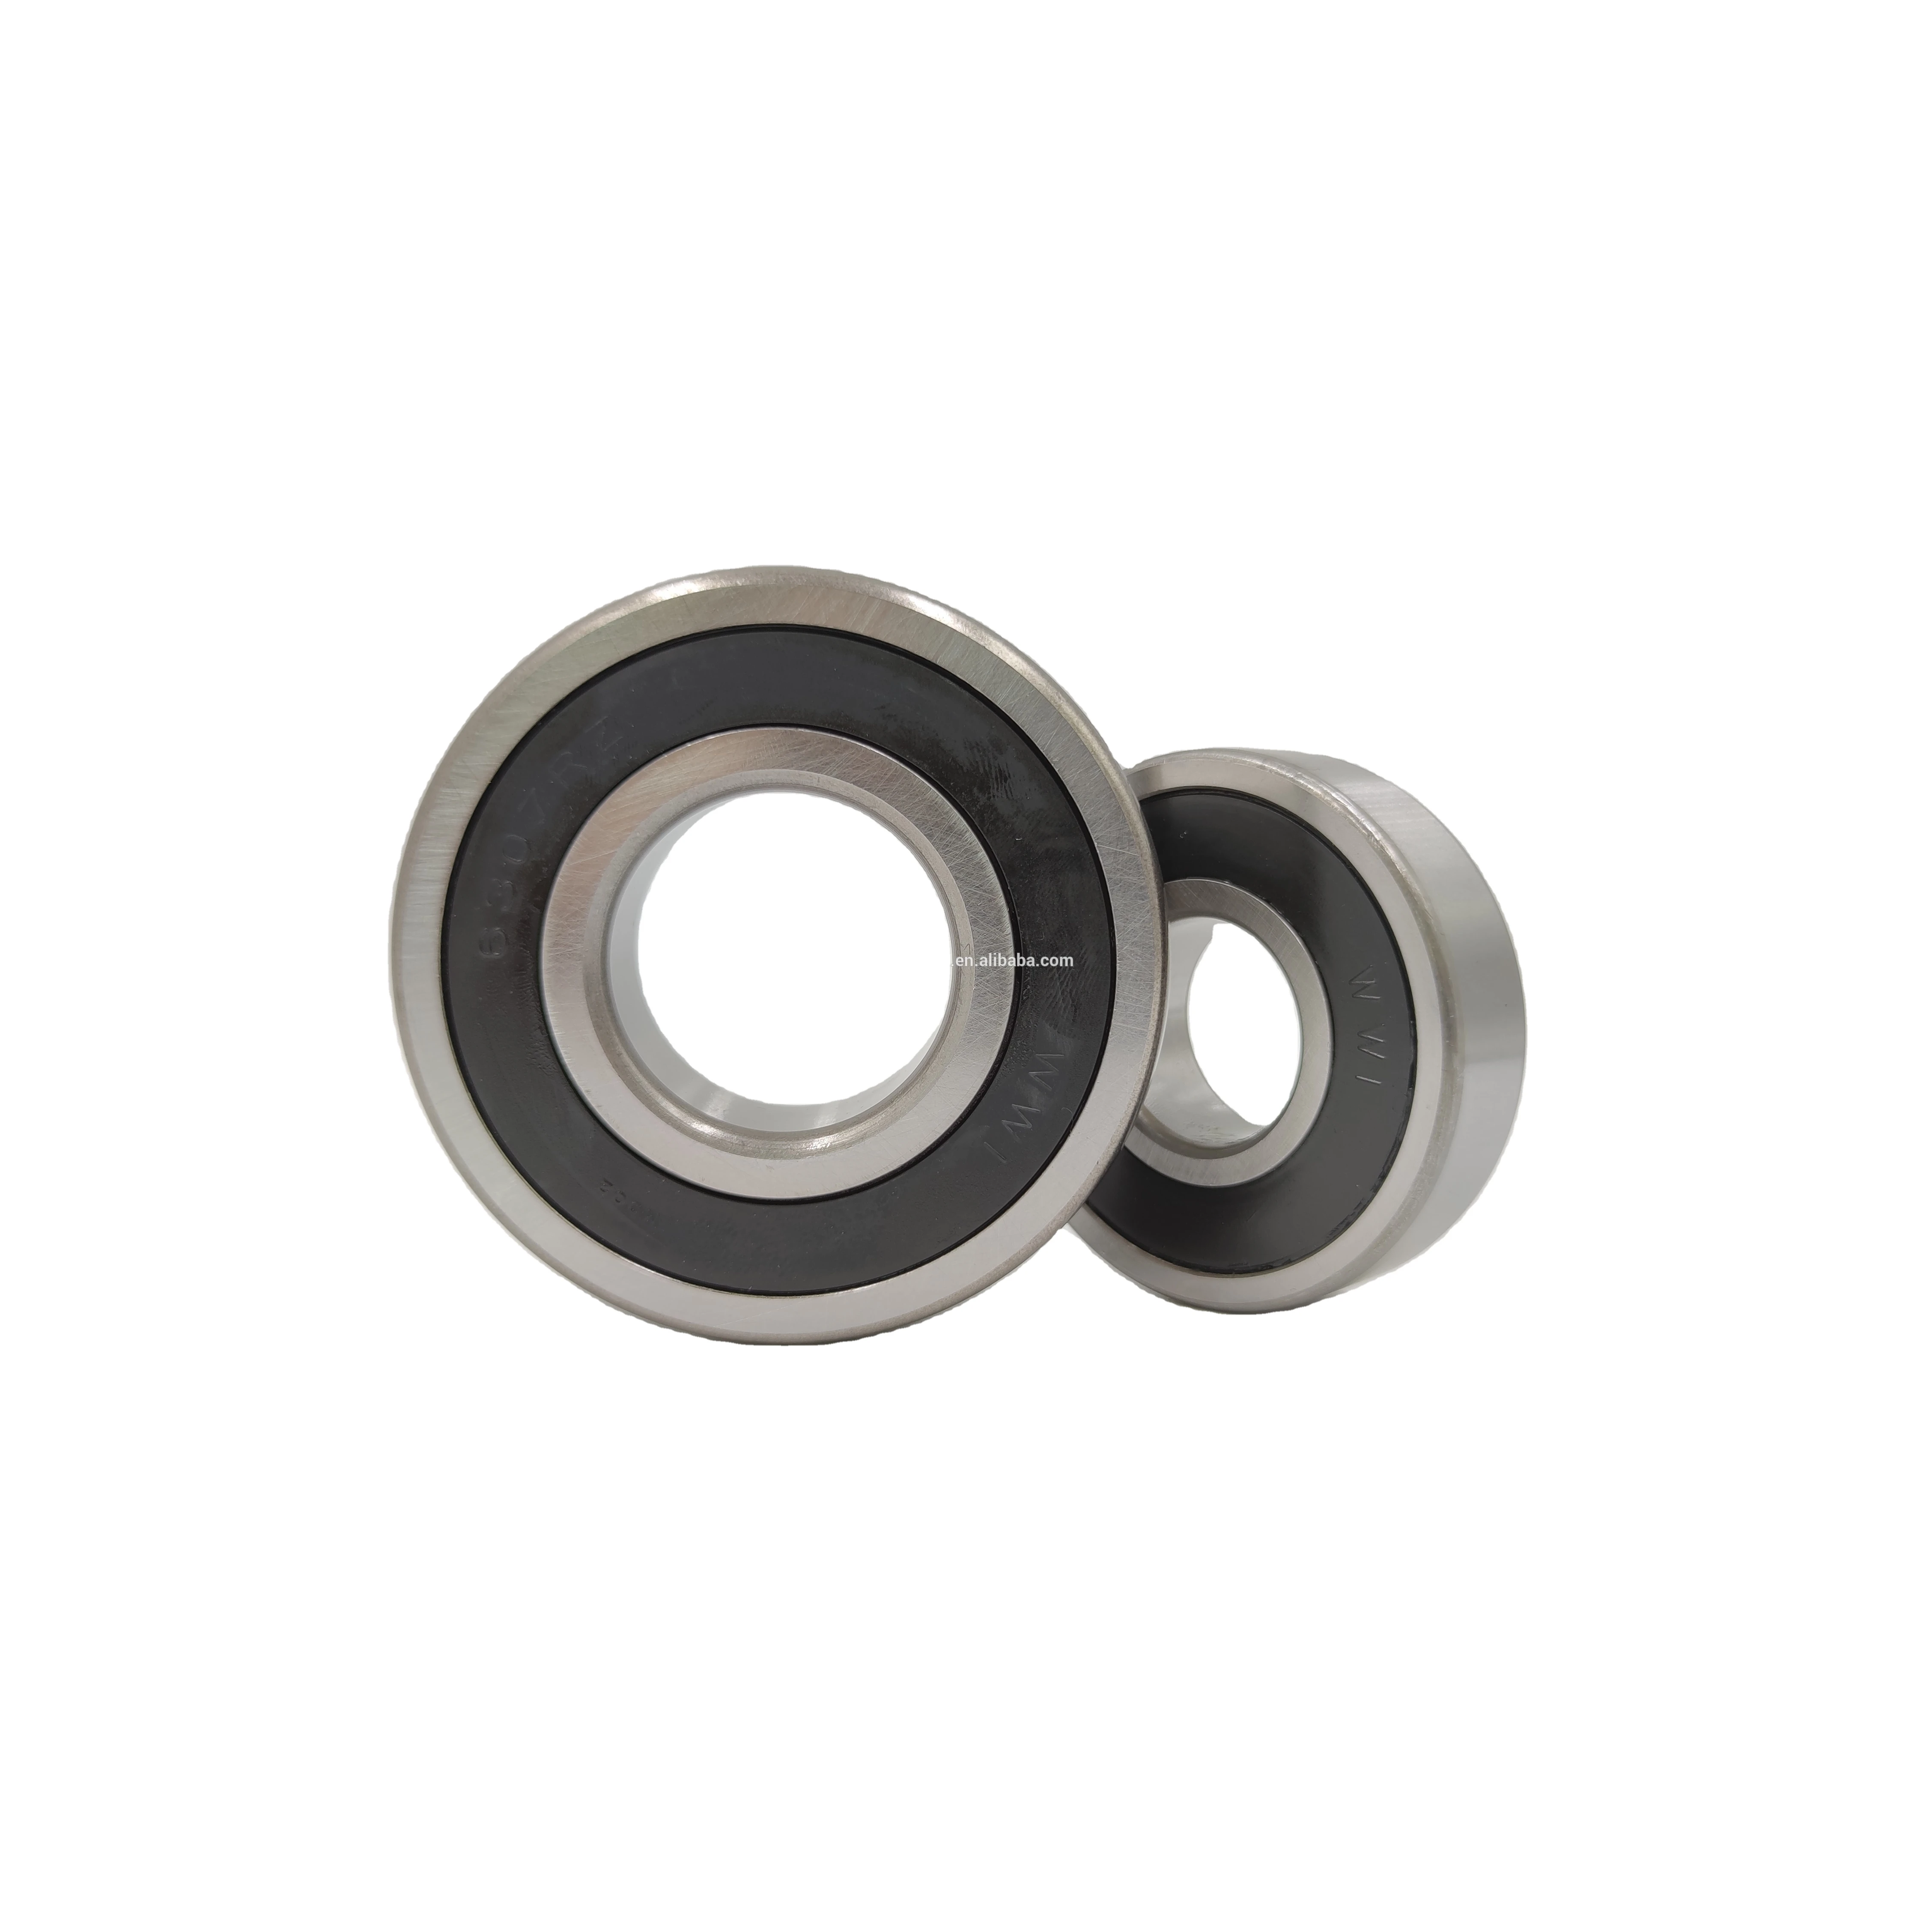 Low noise High quality All types   Angular contact ball bearings 7216-2RS SIZE 140*80*26 Ball BEARING